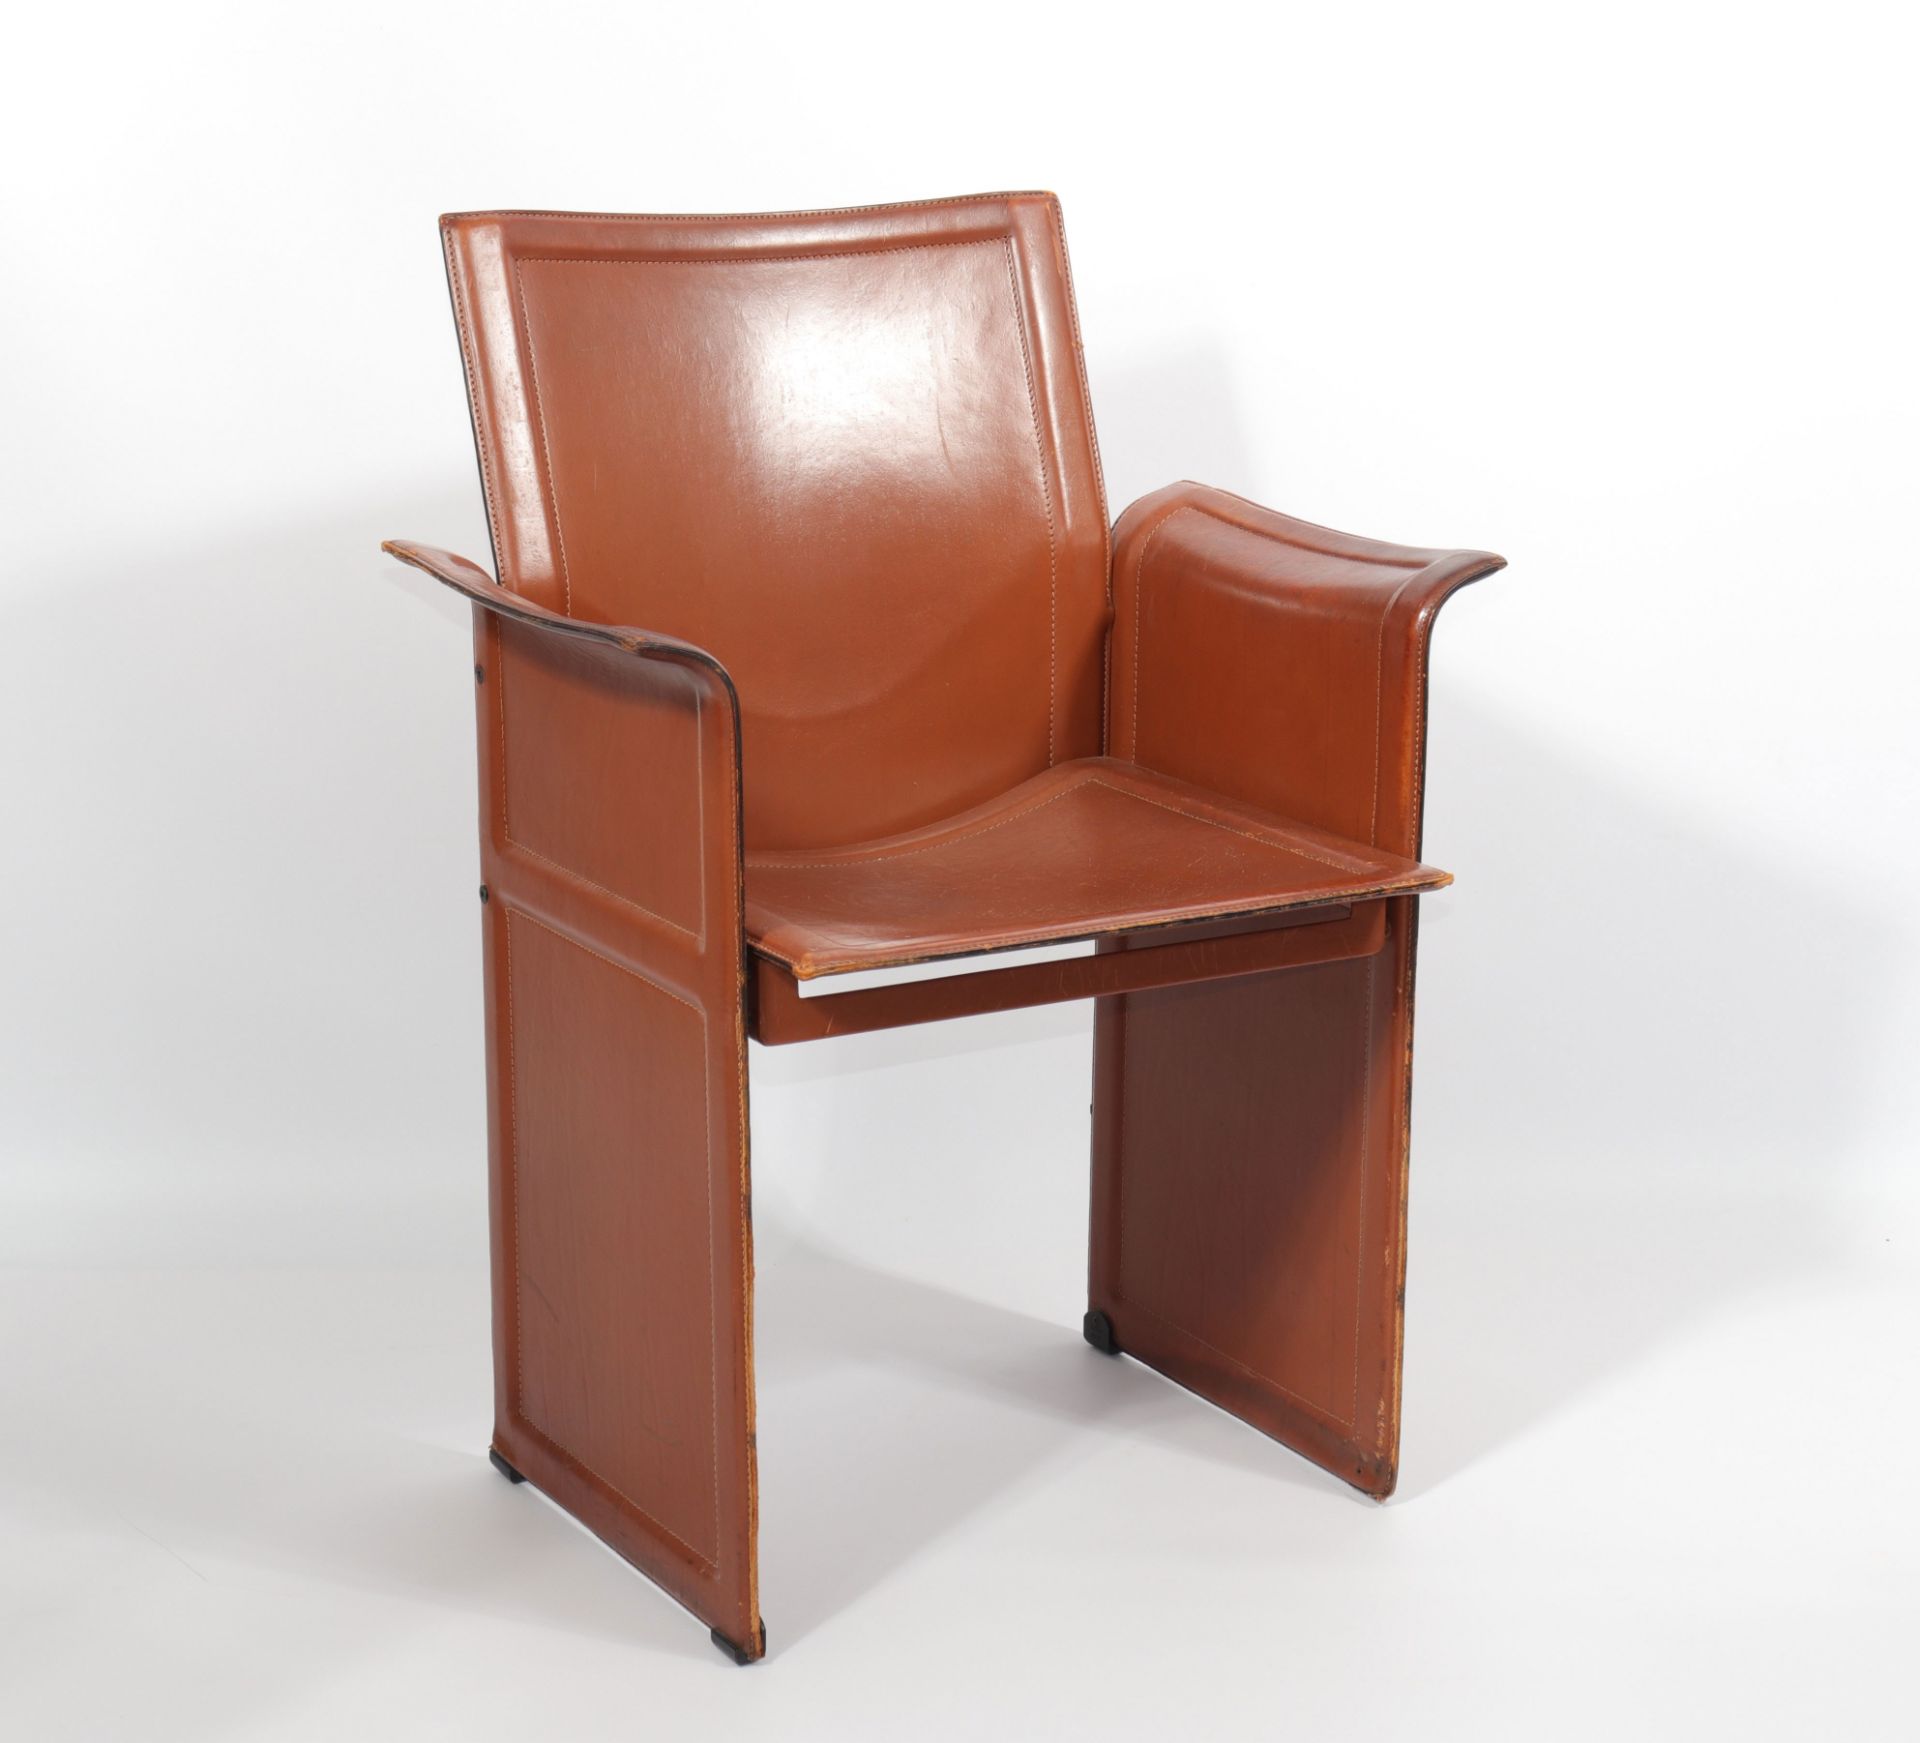 Suite of 12 Matteo Grassi chairs in brown patina leather